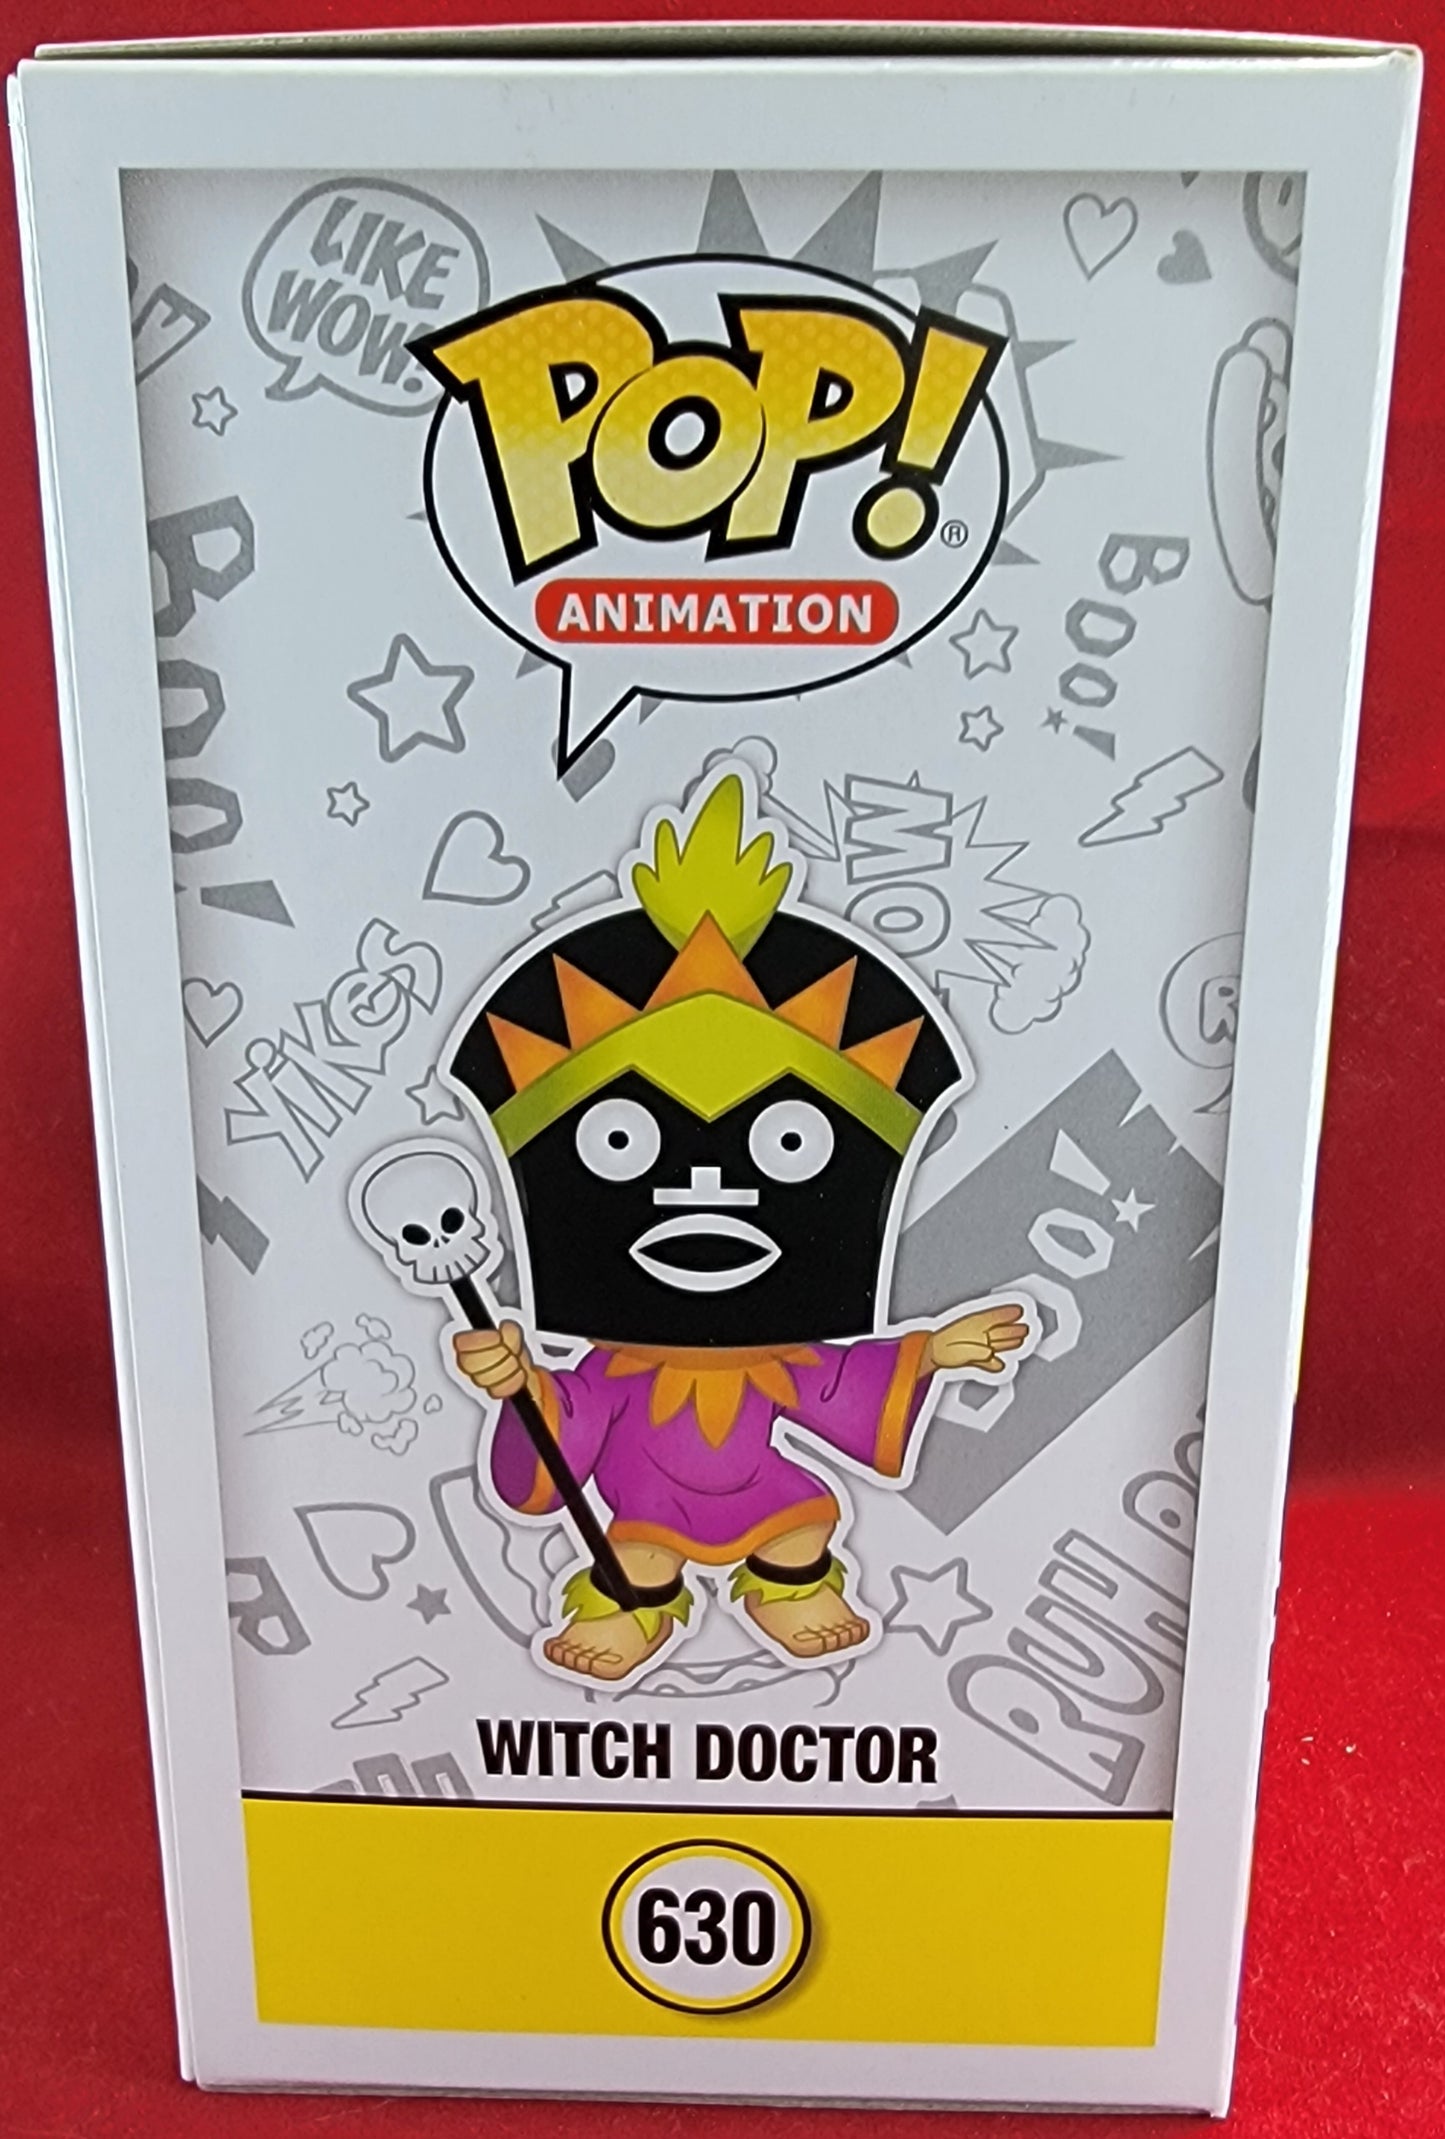 Witch doctor funko # 630 (nib)
With pop protector